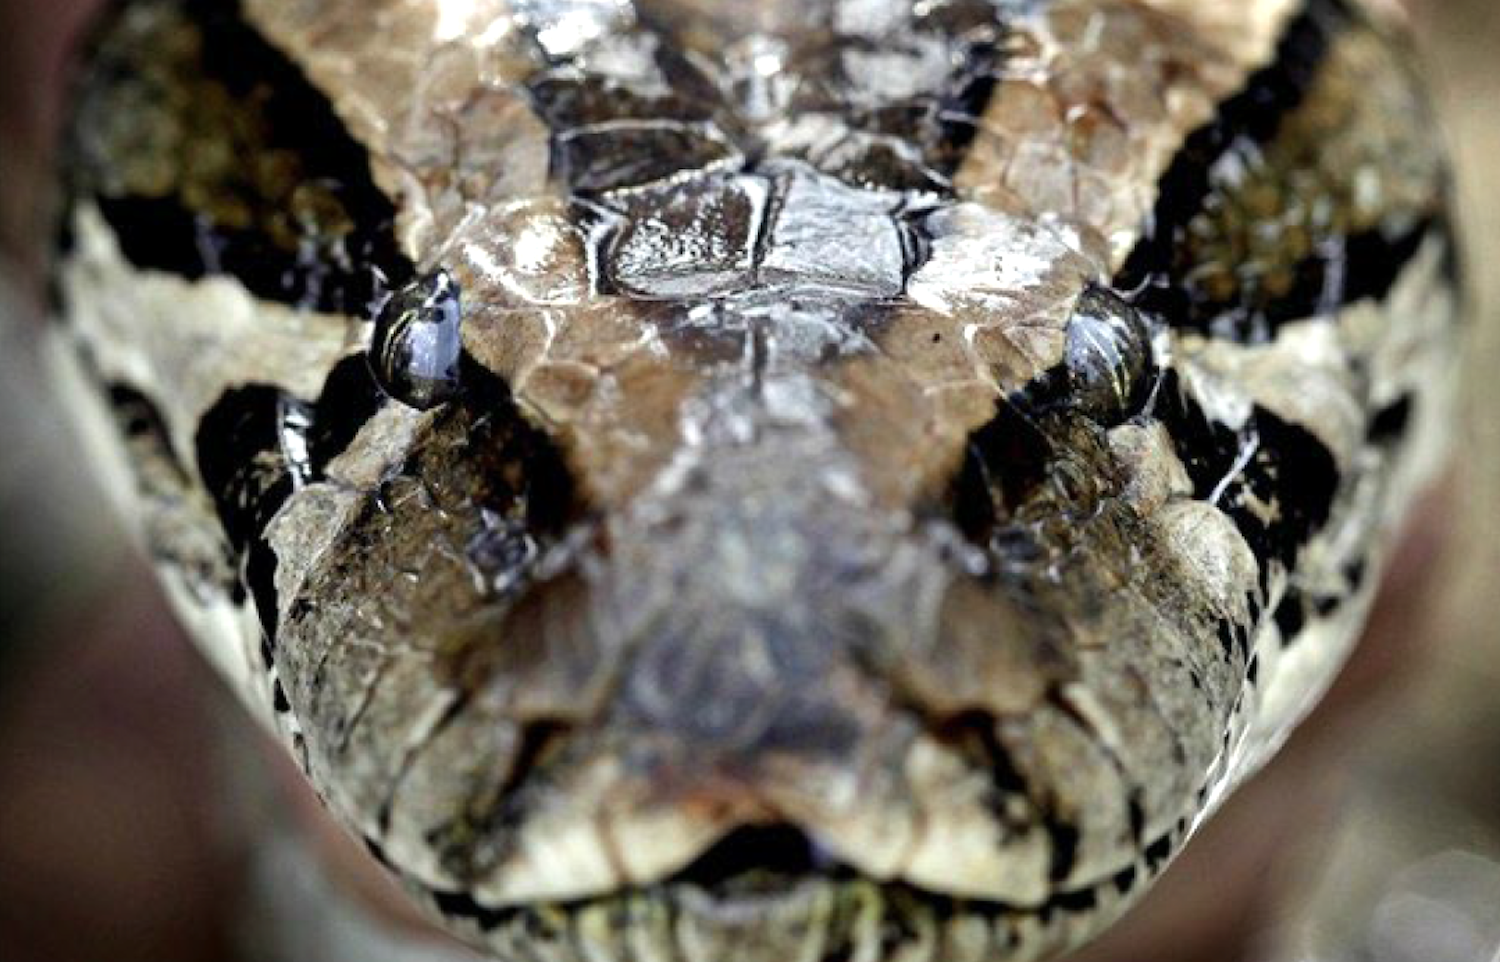 Burmese pythons just might be the poster child for invasive species in the National Park System